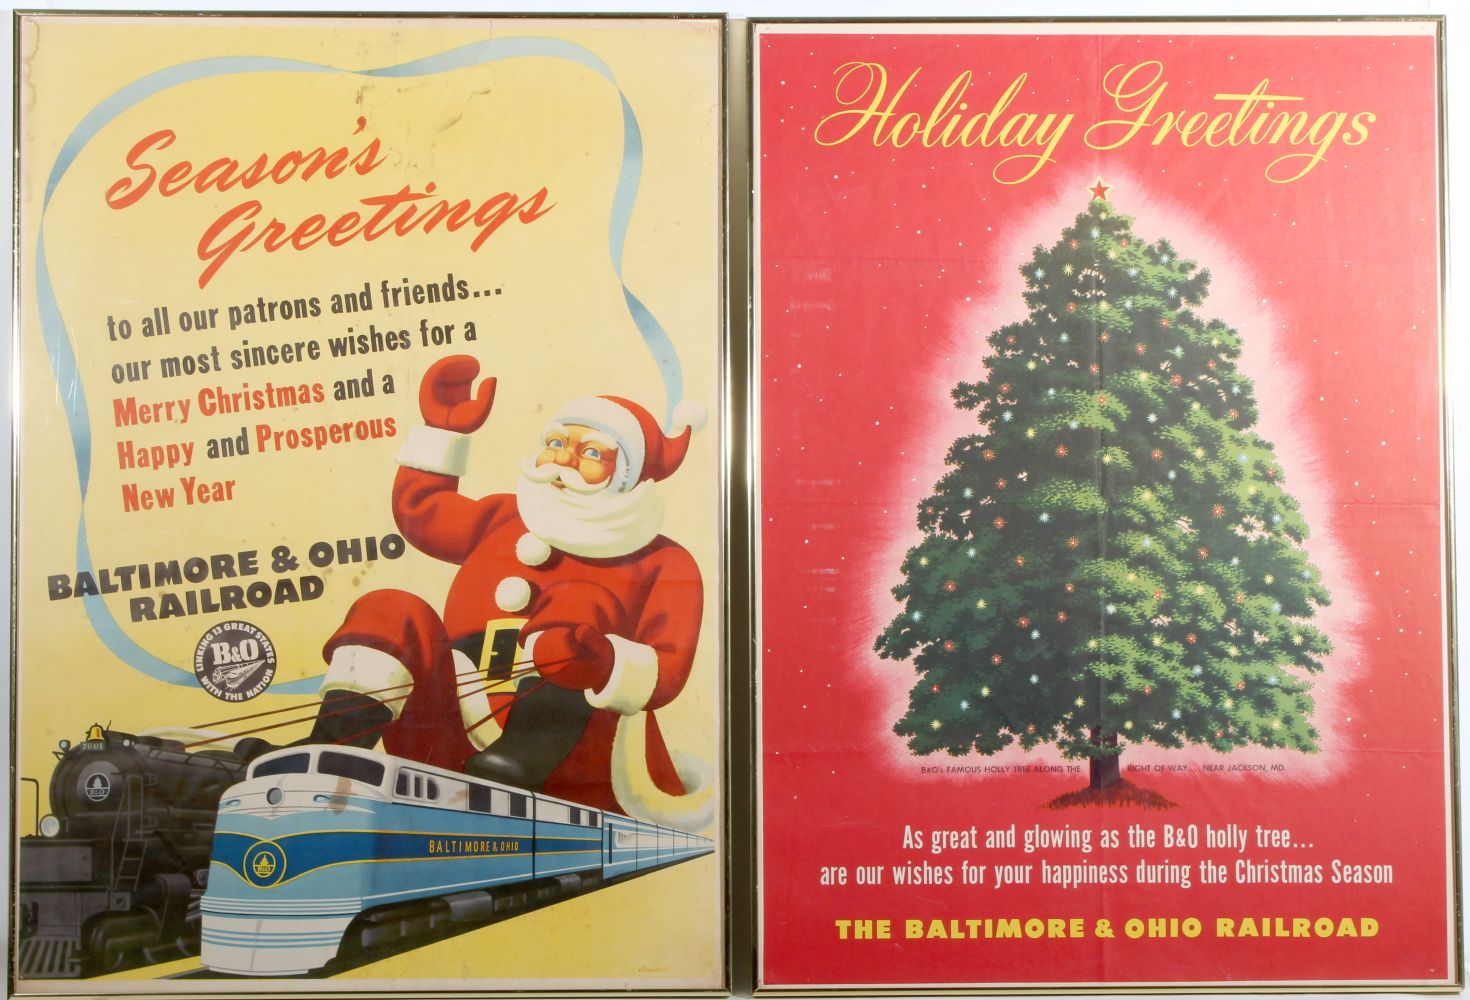 TWO B.&O. RAILROAD HOLIDAY GREETINGS TRAVEL POSTERS